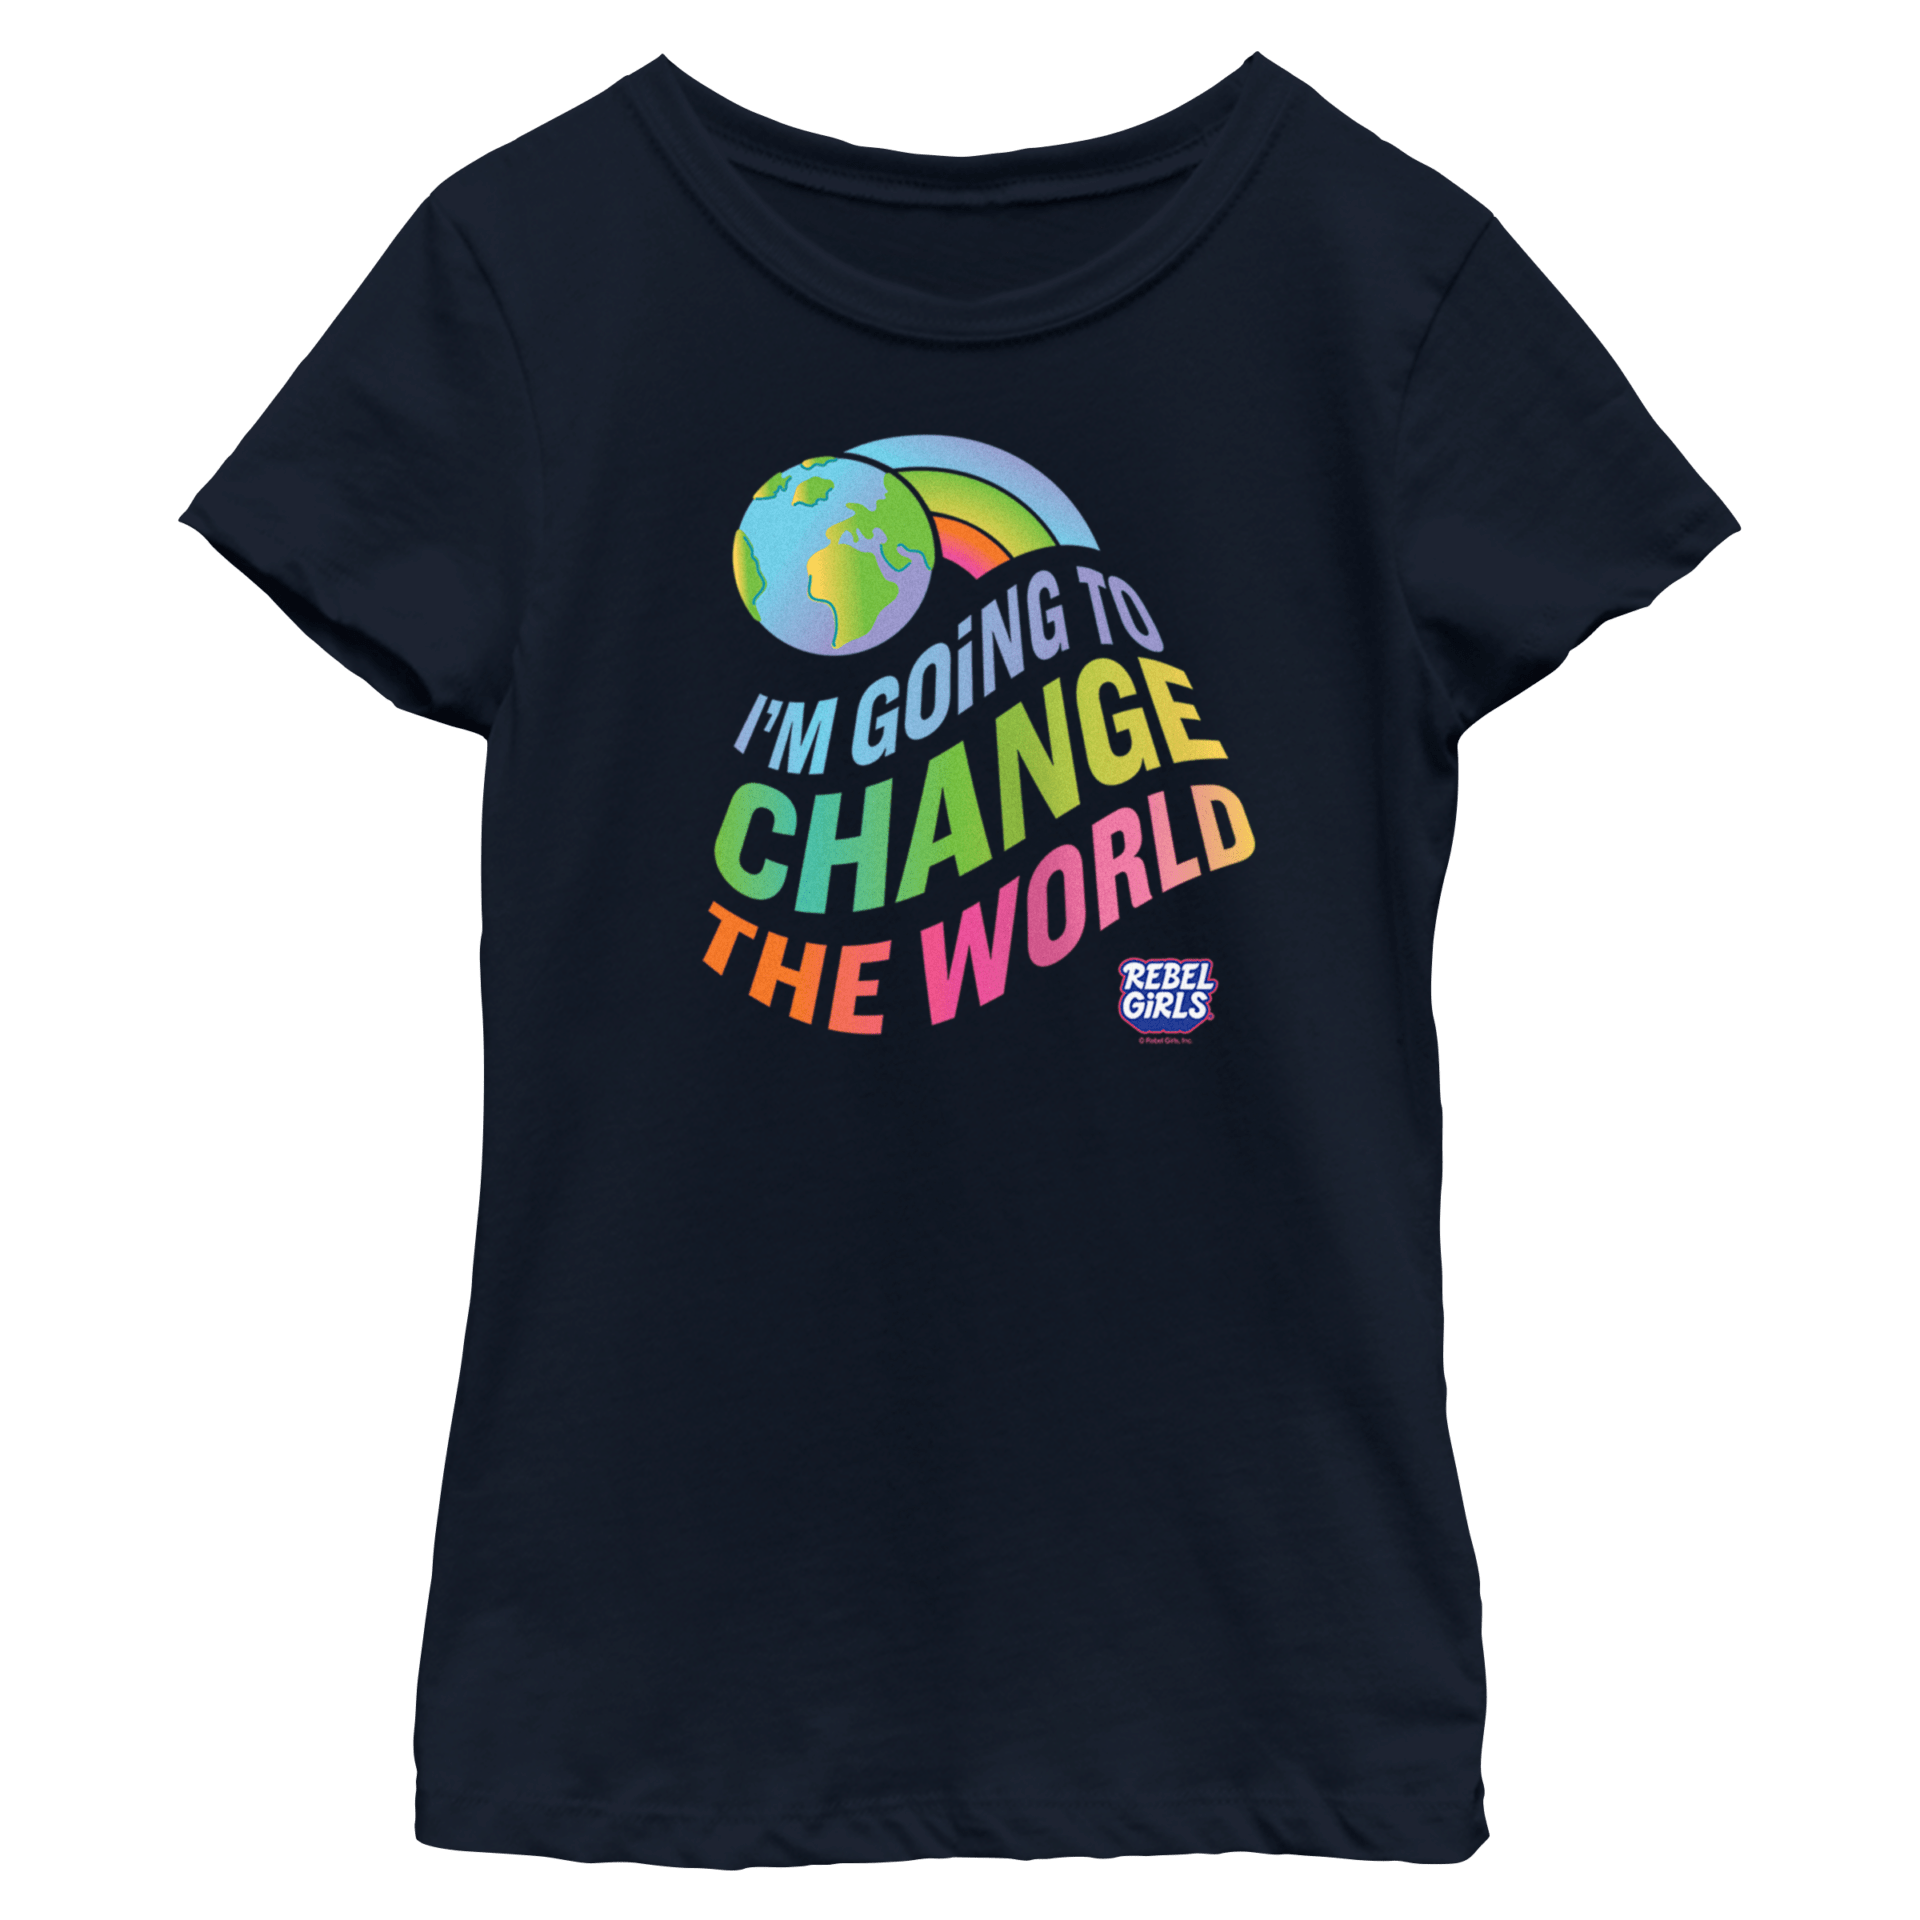 &#8220;I’m Going To Change The World&#8221; Tees and Tops